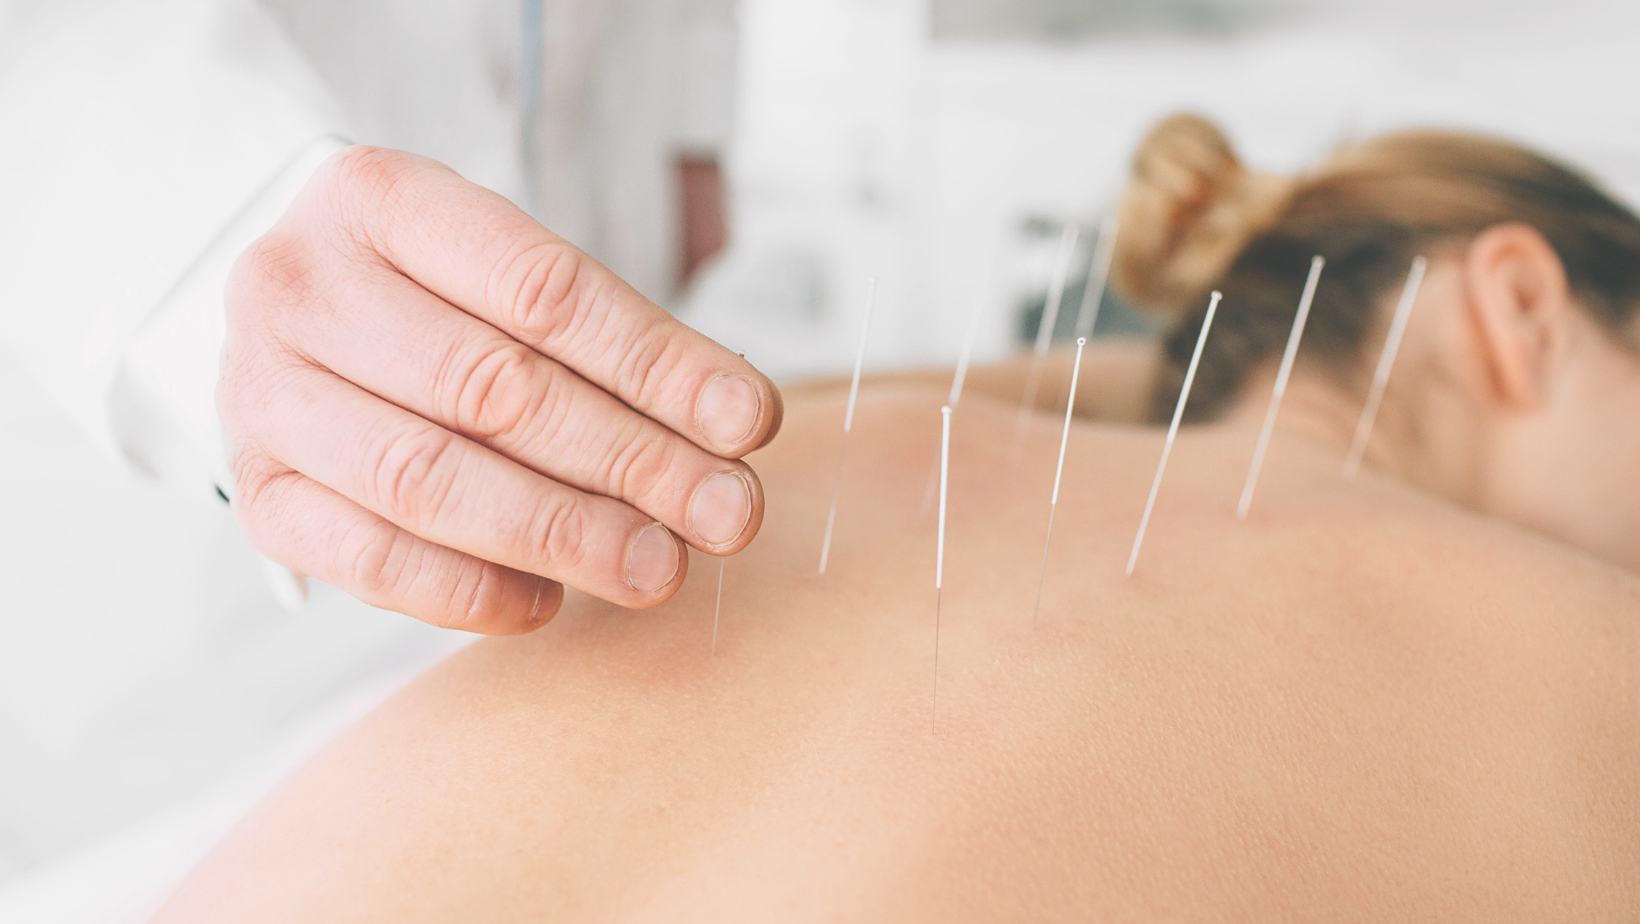 Treating Energy Flow with Acupuncture